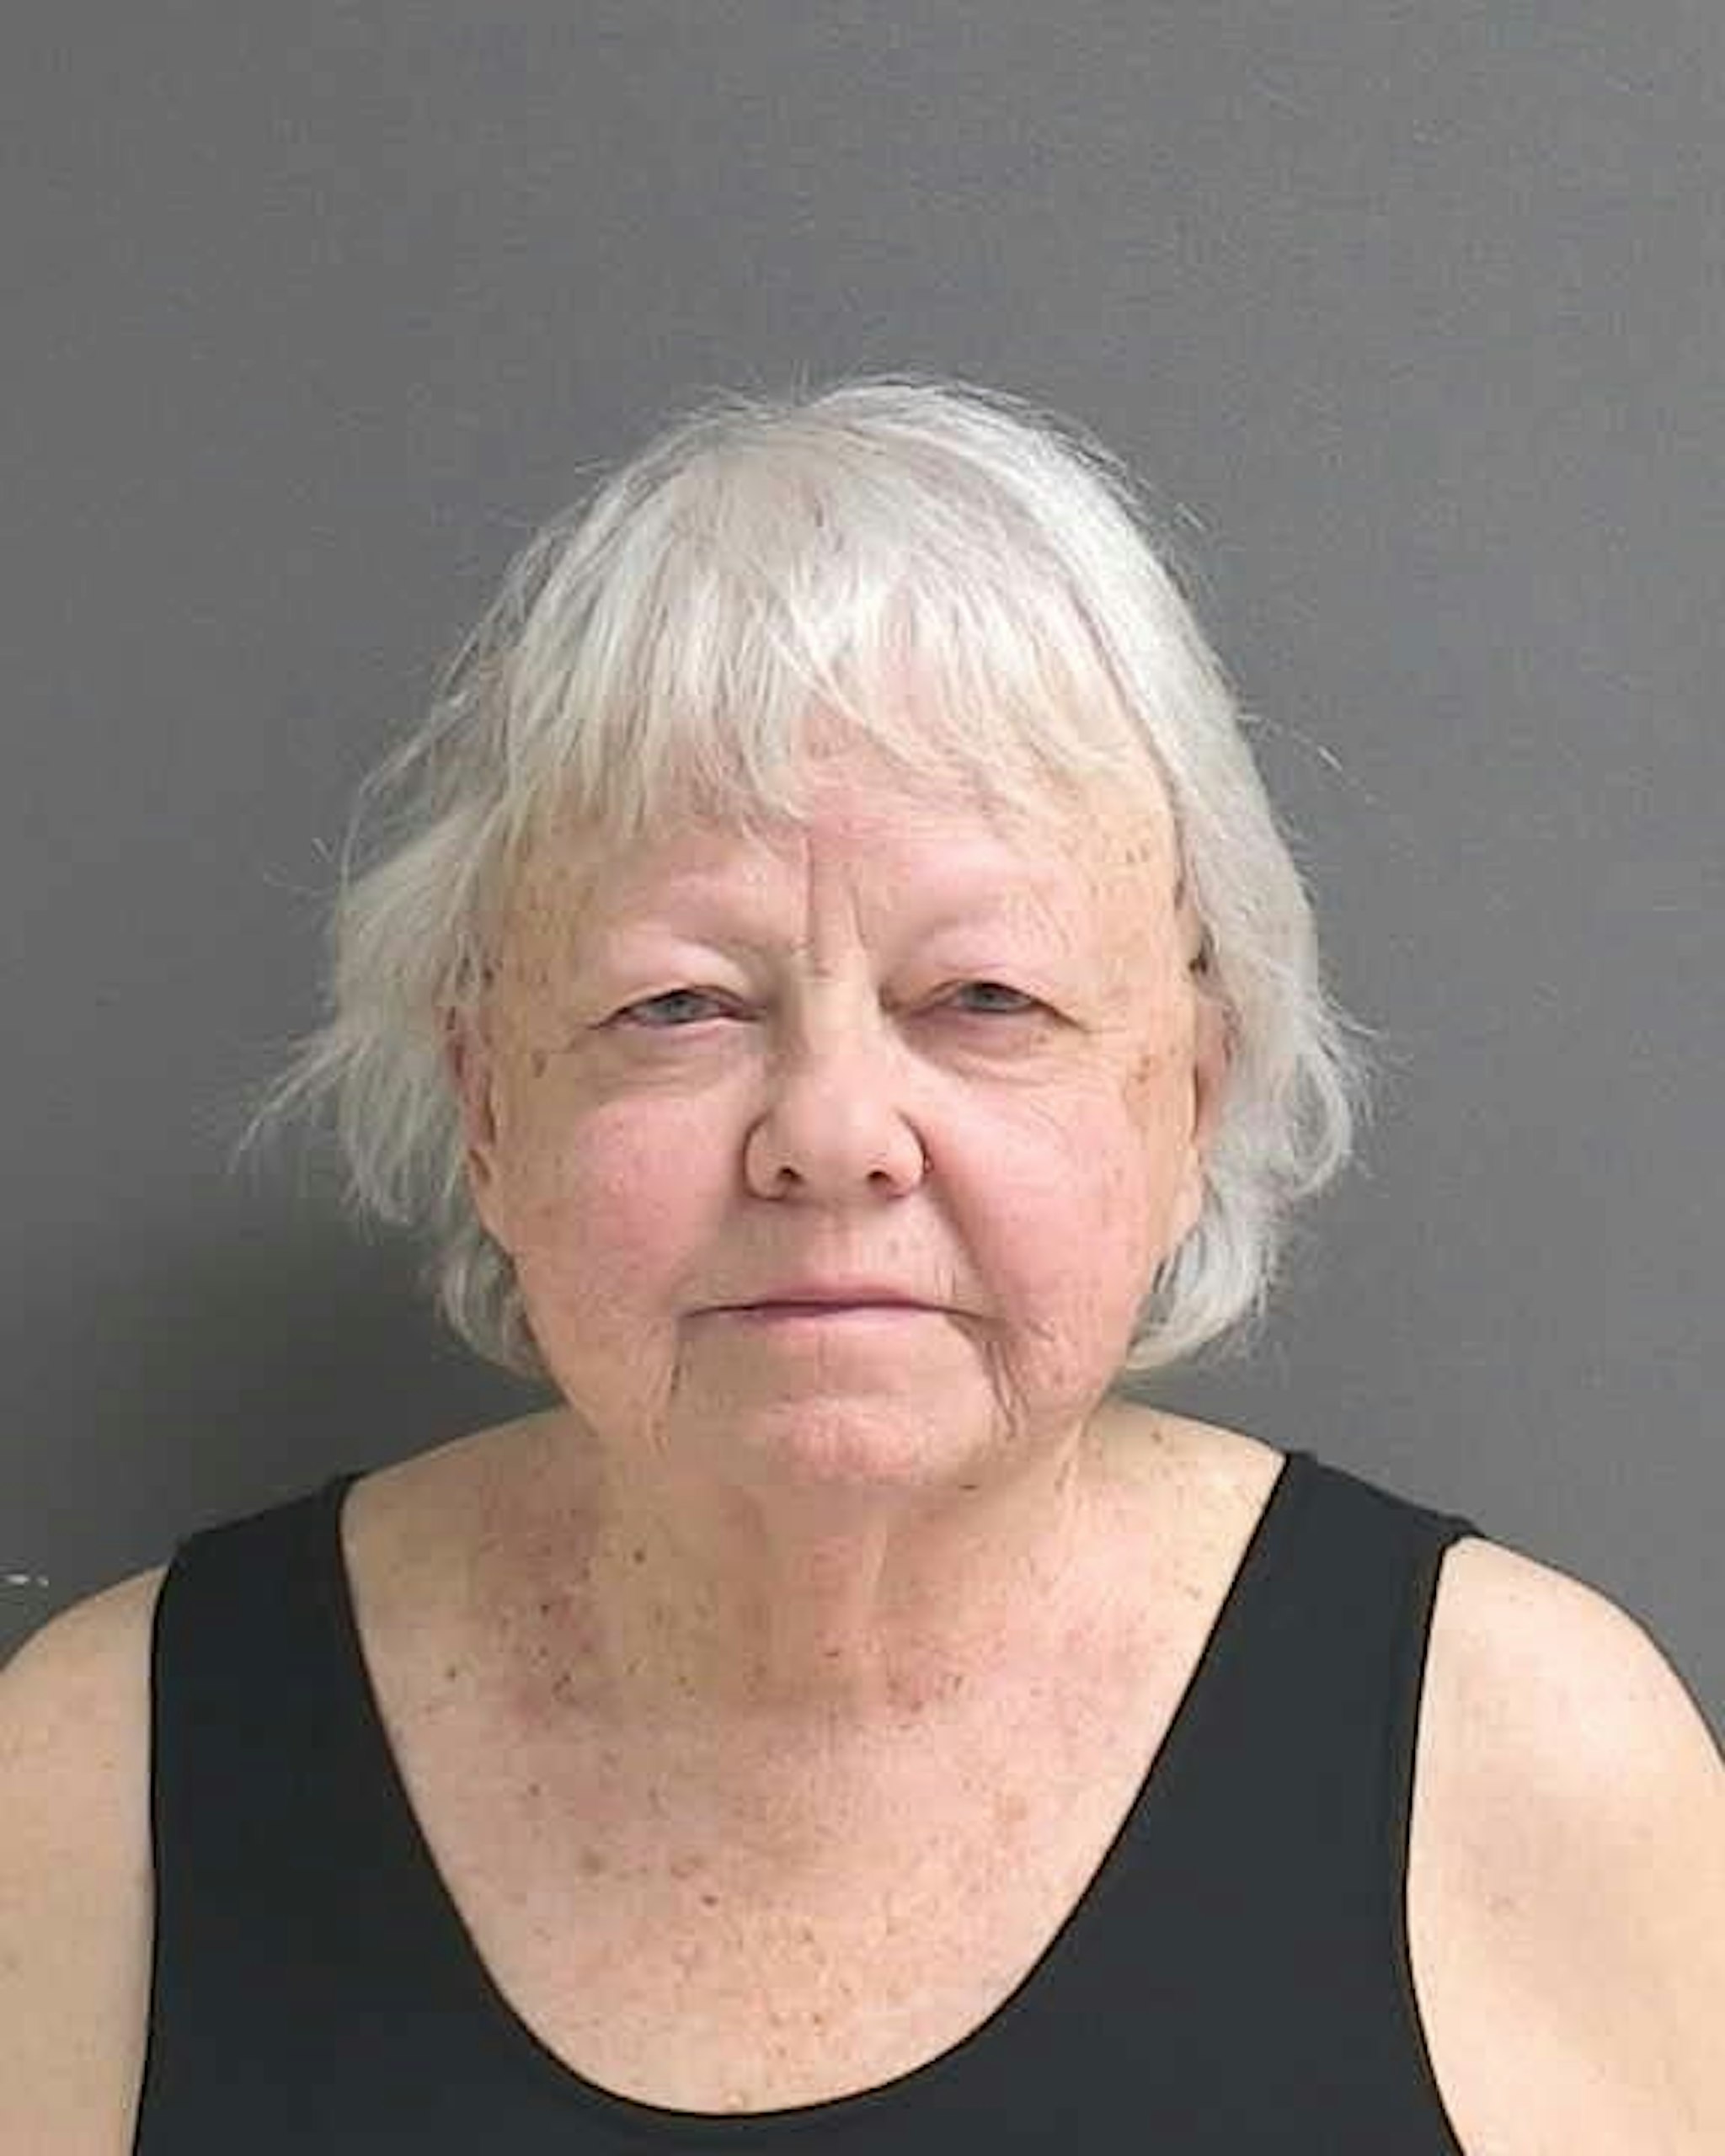 Ellen Gilland has been charged with first-degree murder and aggravated assault with a deadly weapon after she shot her terminally ill husband in his hospital room.